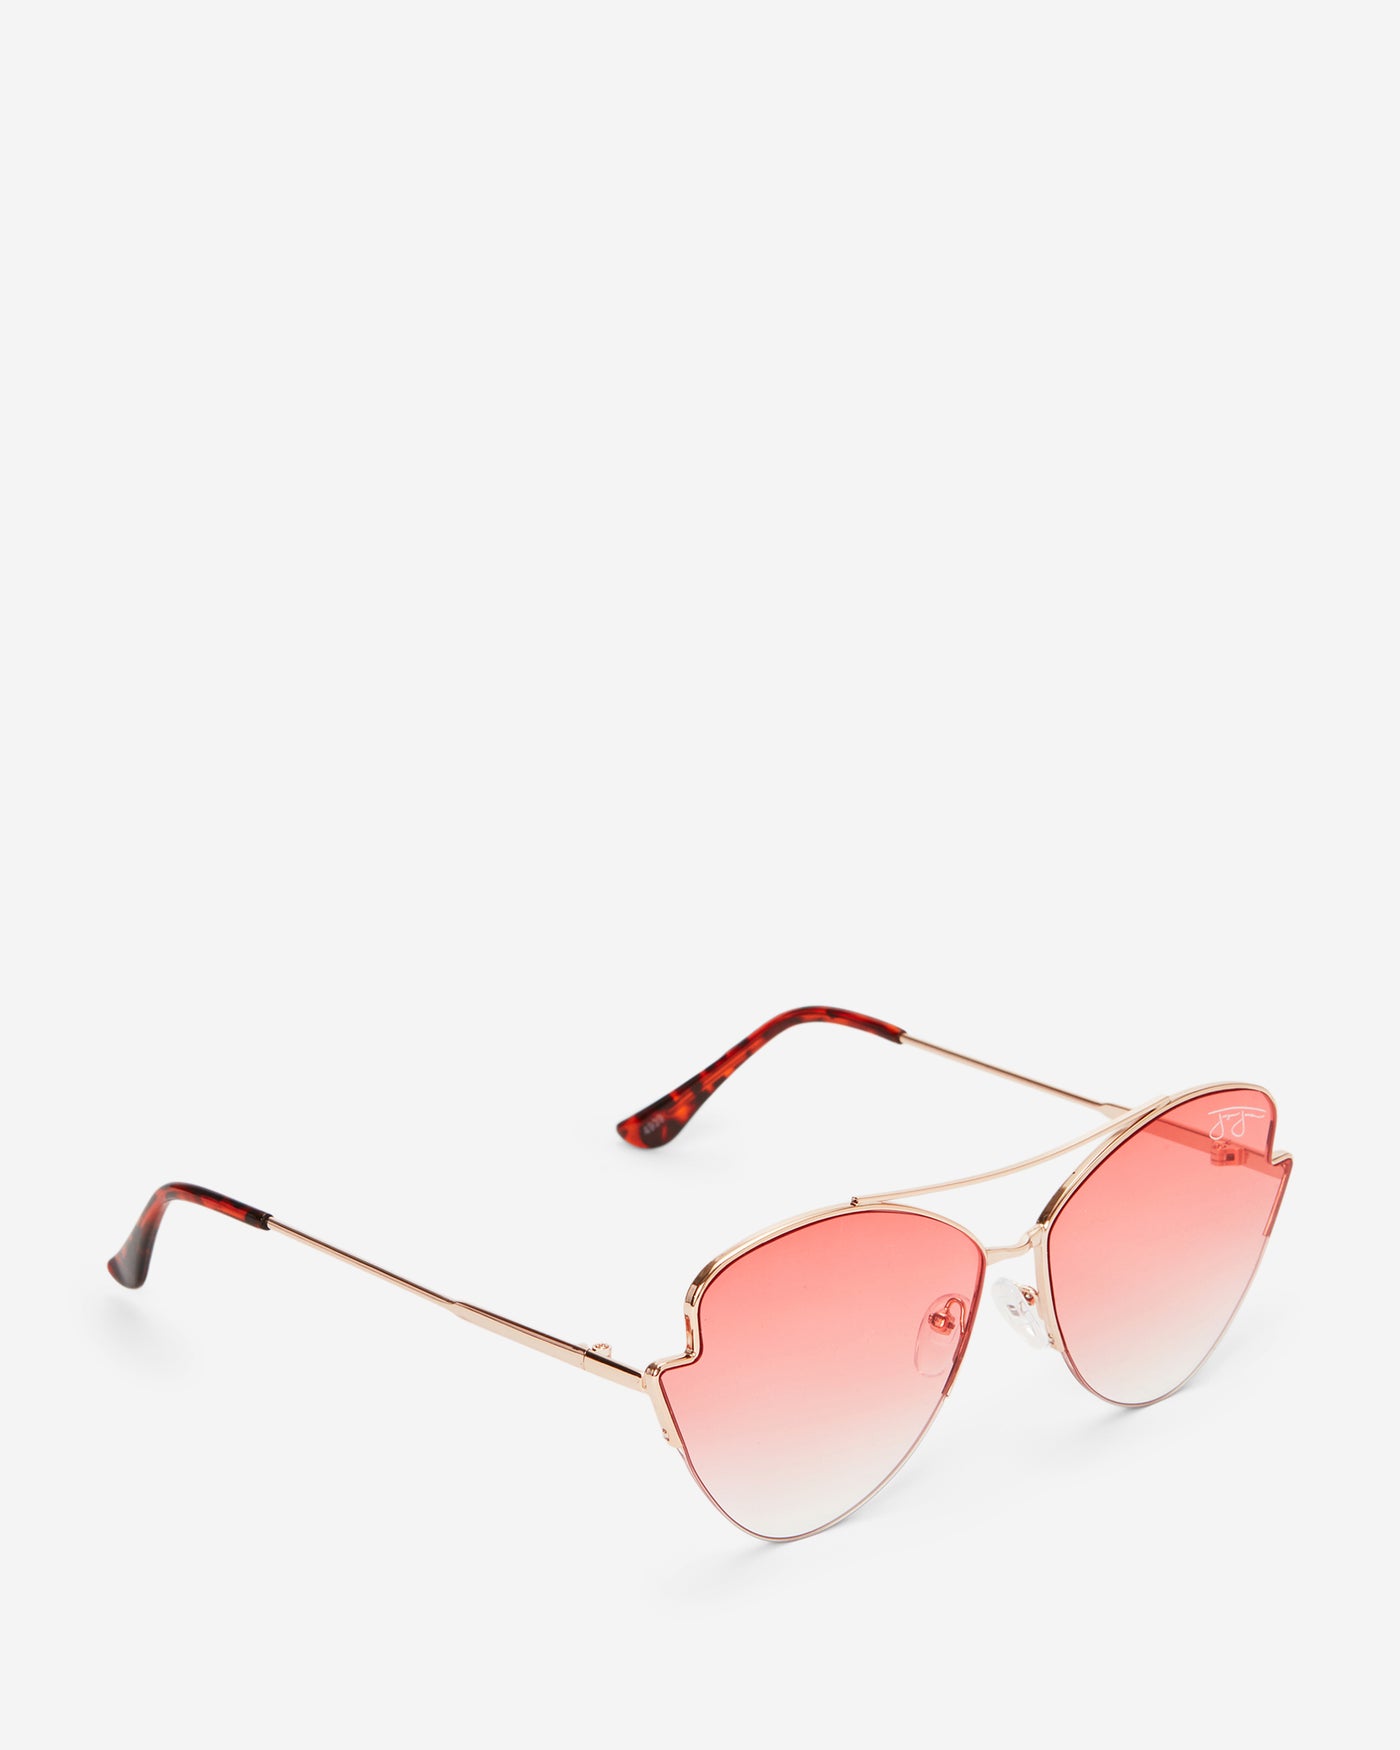 Geometric Aviator Sunglasses - Gold Metal Frame with Pink Lens Sunglasses Joey James, The Label   